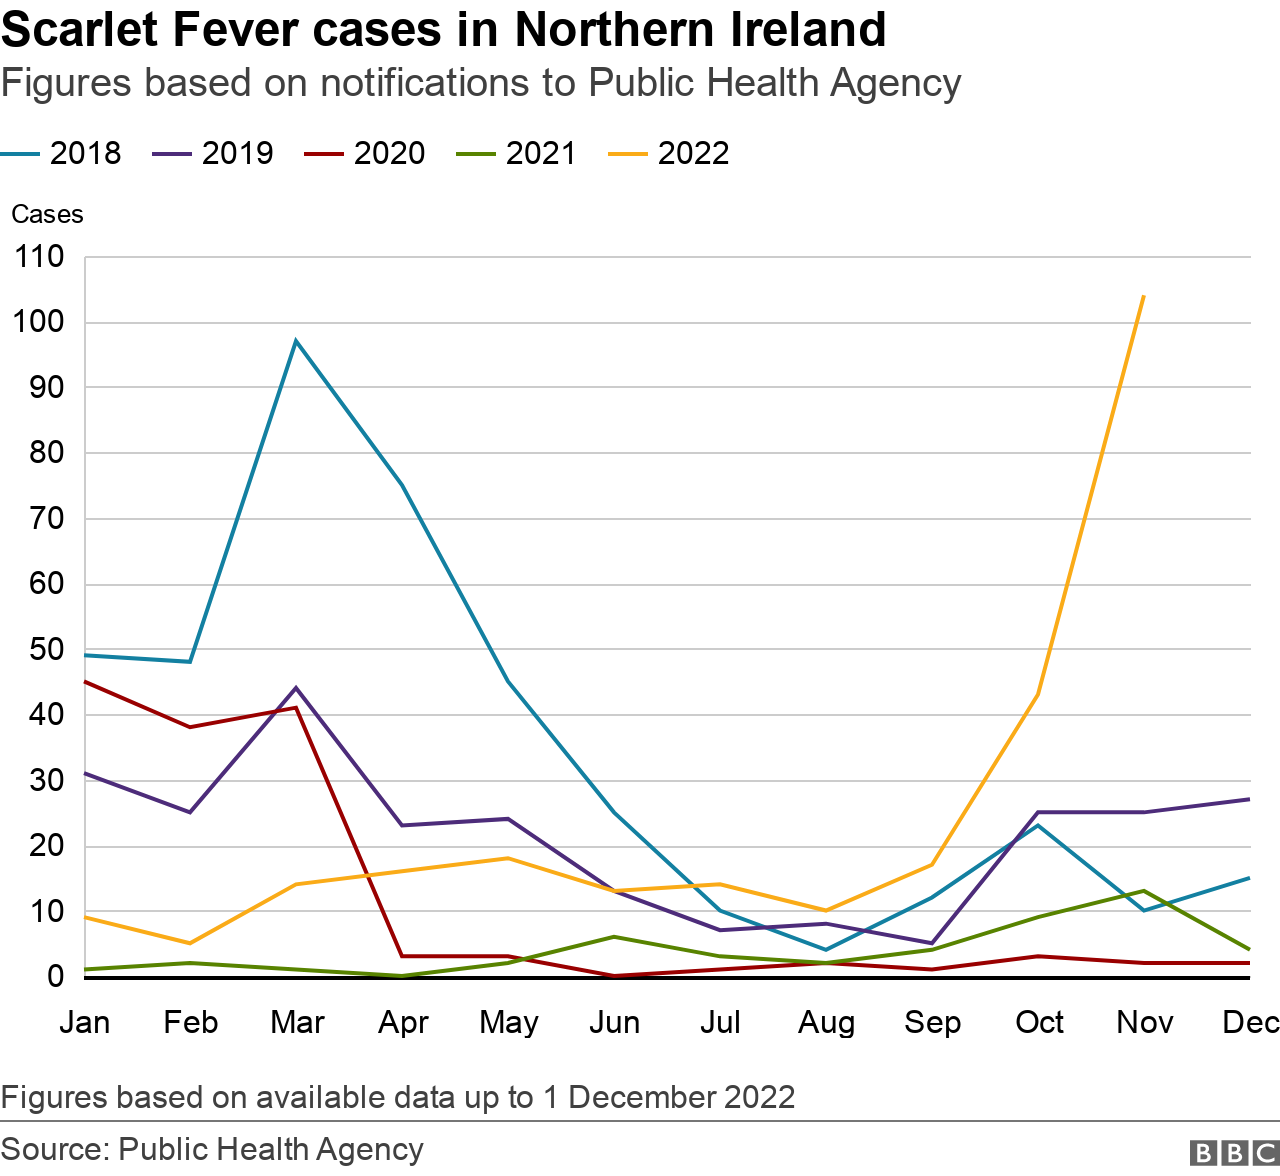 Scarlet fever cases in Northern Ireland by year